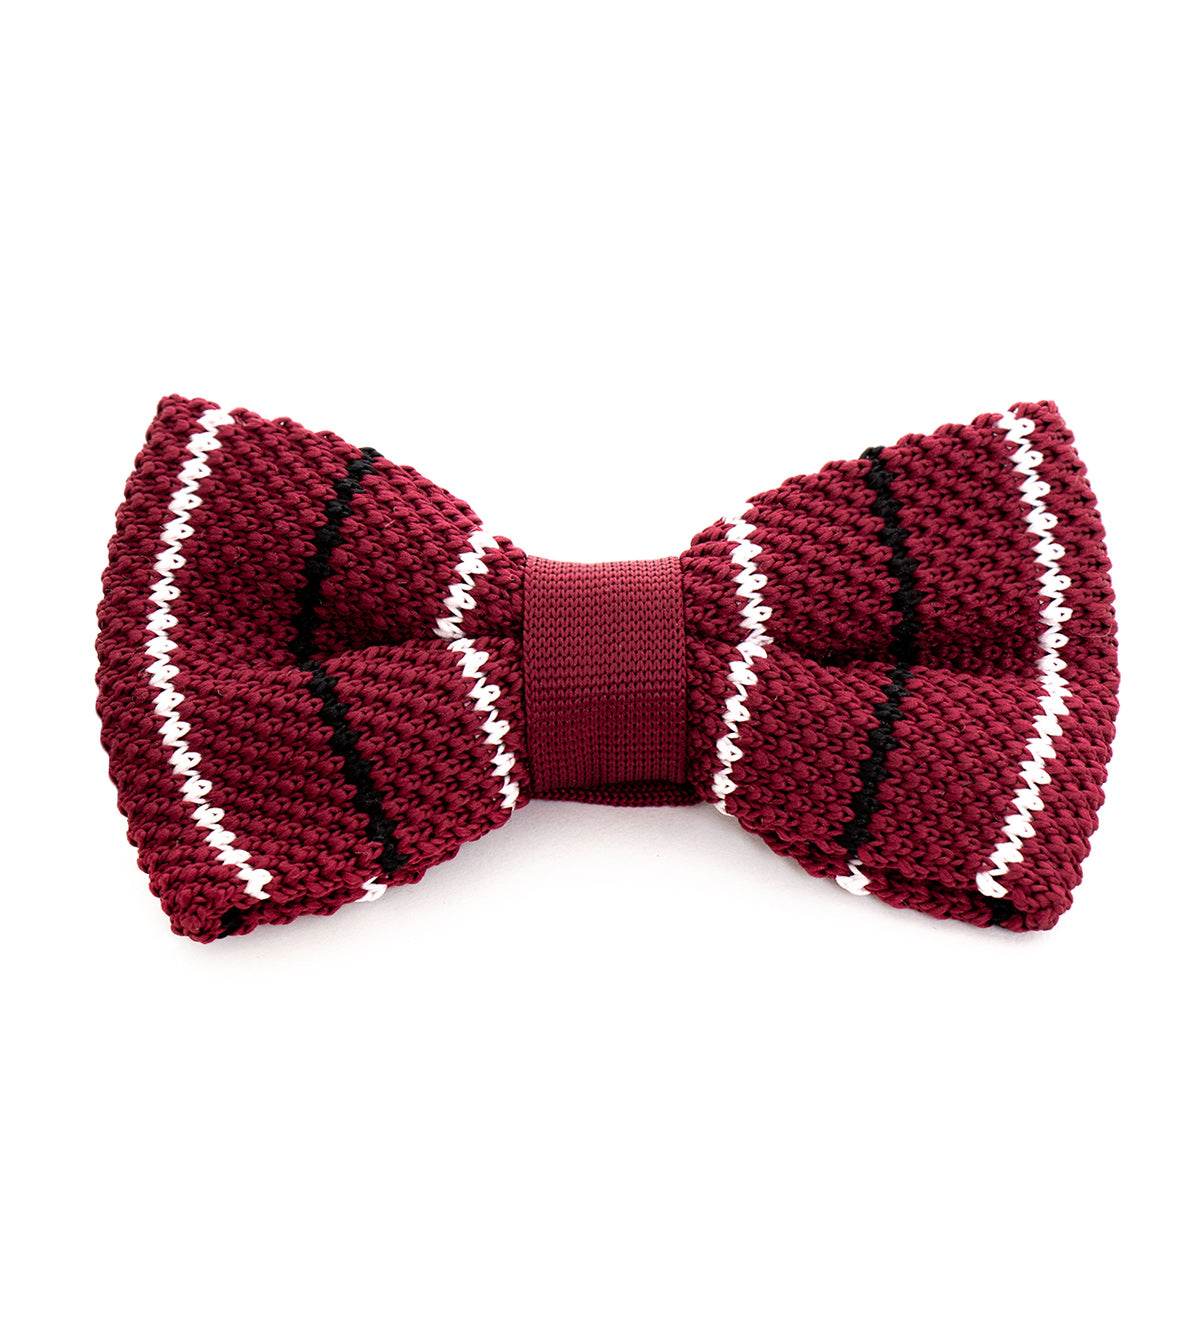 Bow Tie Butterfly Bow Man Unisex Elegant Ceremony Accessory Red Striped Knitted GIOSAL-CP1094A 